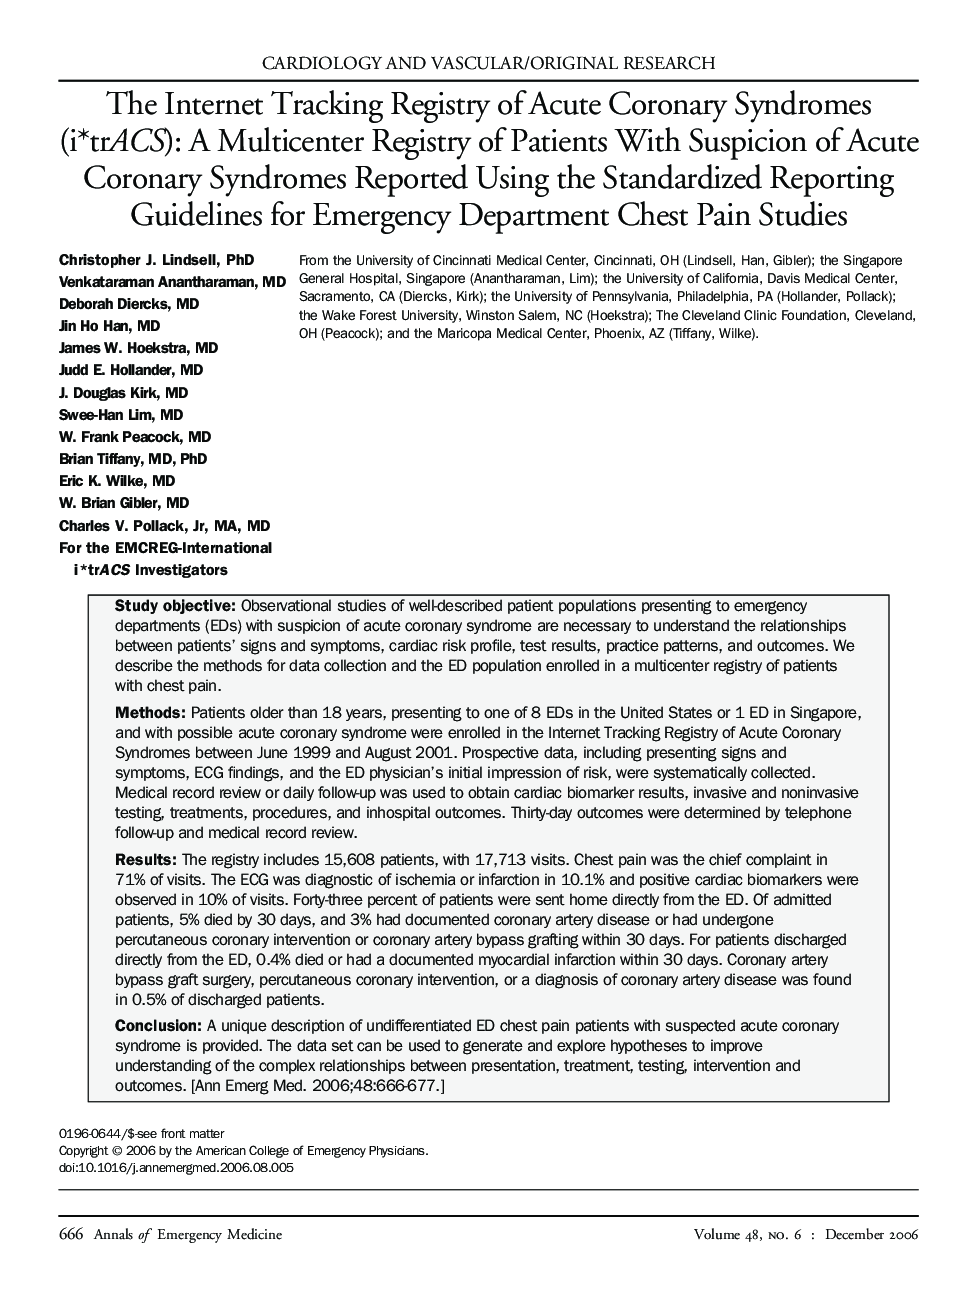 The Internet Tracking Registry of Acute Coronary Syndromes (i*trACS): A Multicenter Registry of Patients With Suspicion of Acute Coronary Syndromes Reported Using the Standardized Reporting Guidelines for Emergency Department Chest Pain Studies